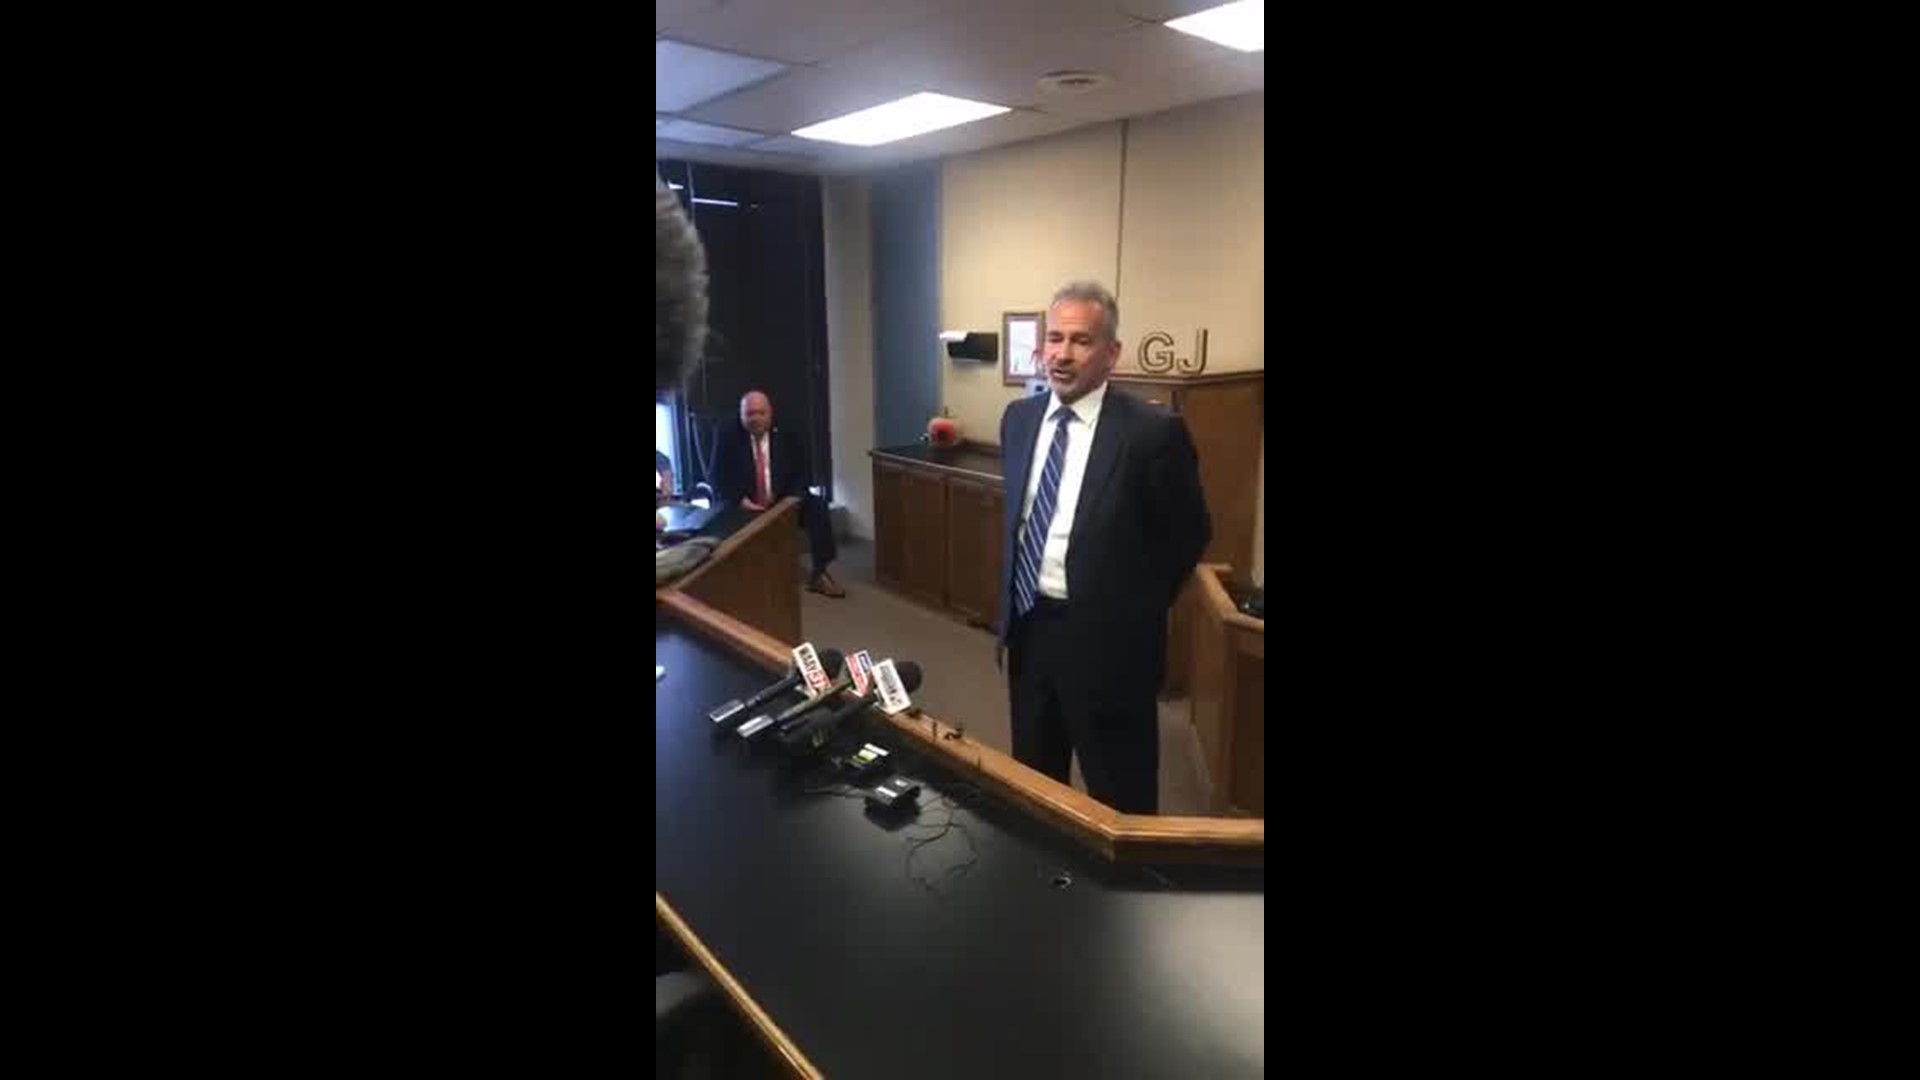 The Madison County D.A.'s office held a press conference to review evidence in the recent officer-involved shooting of Dana Fletcher by Madison Police. The shooting was ruled justified.